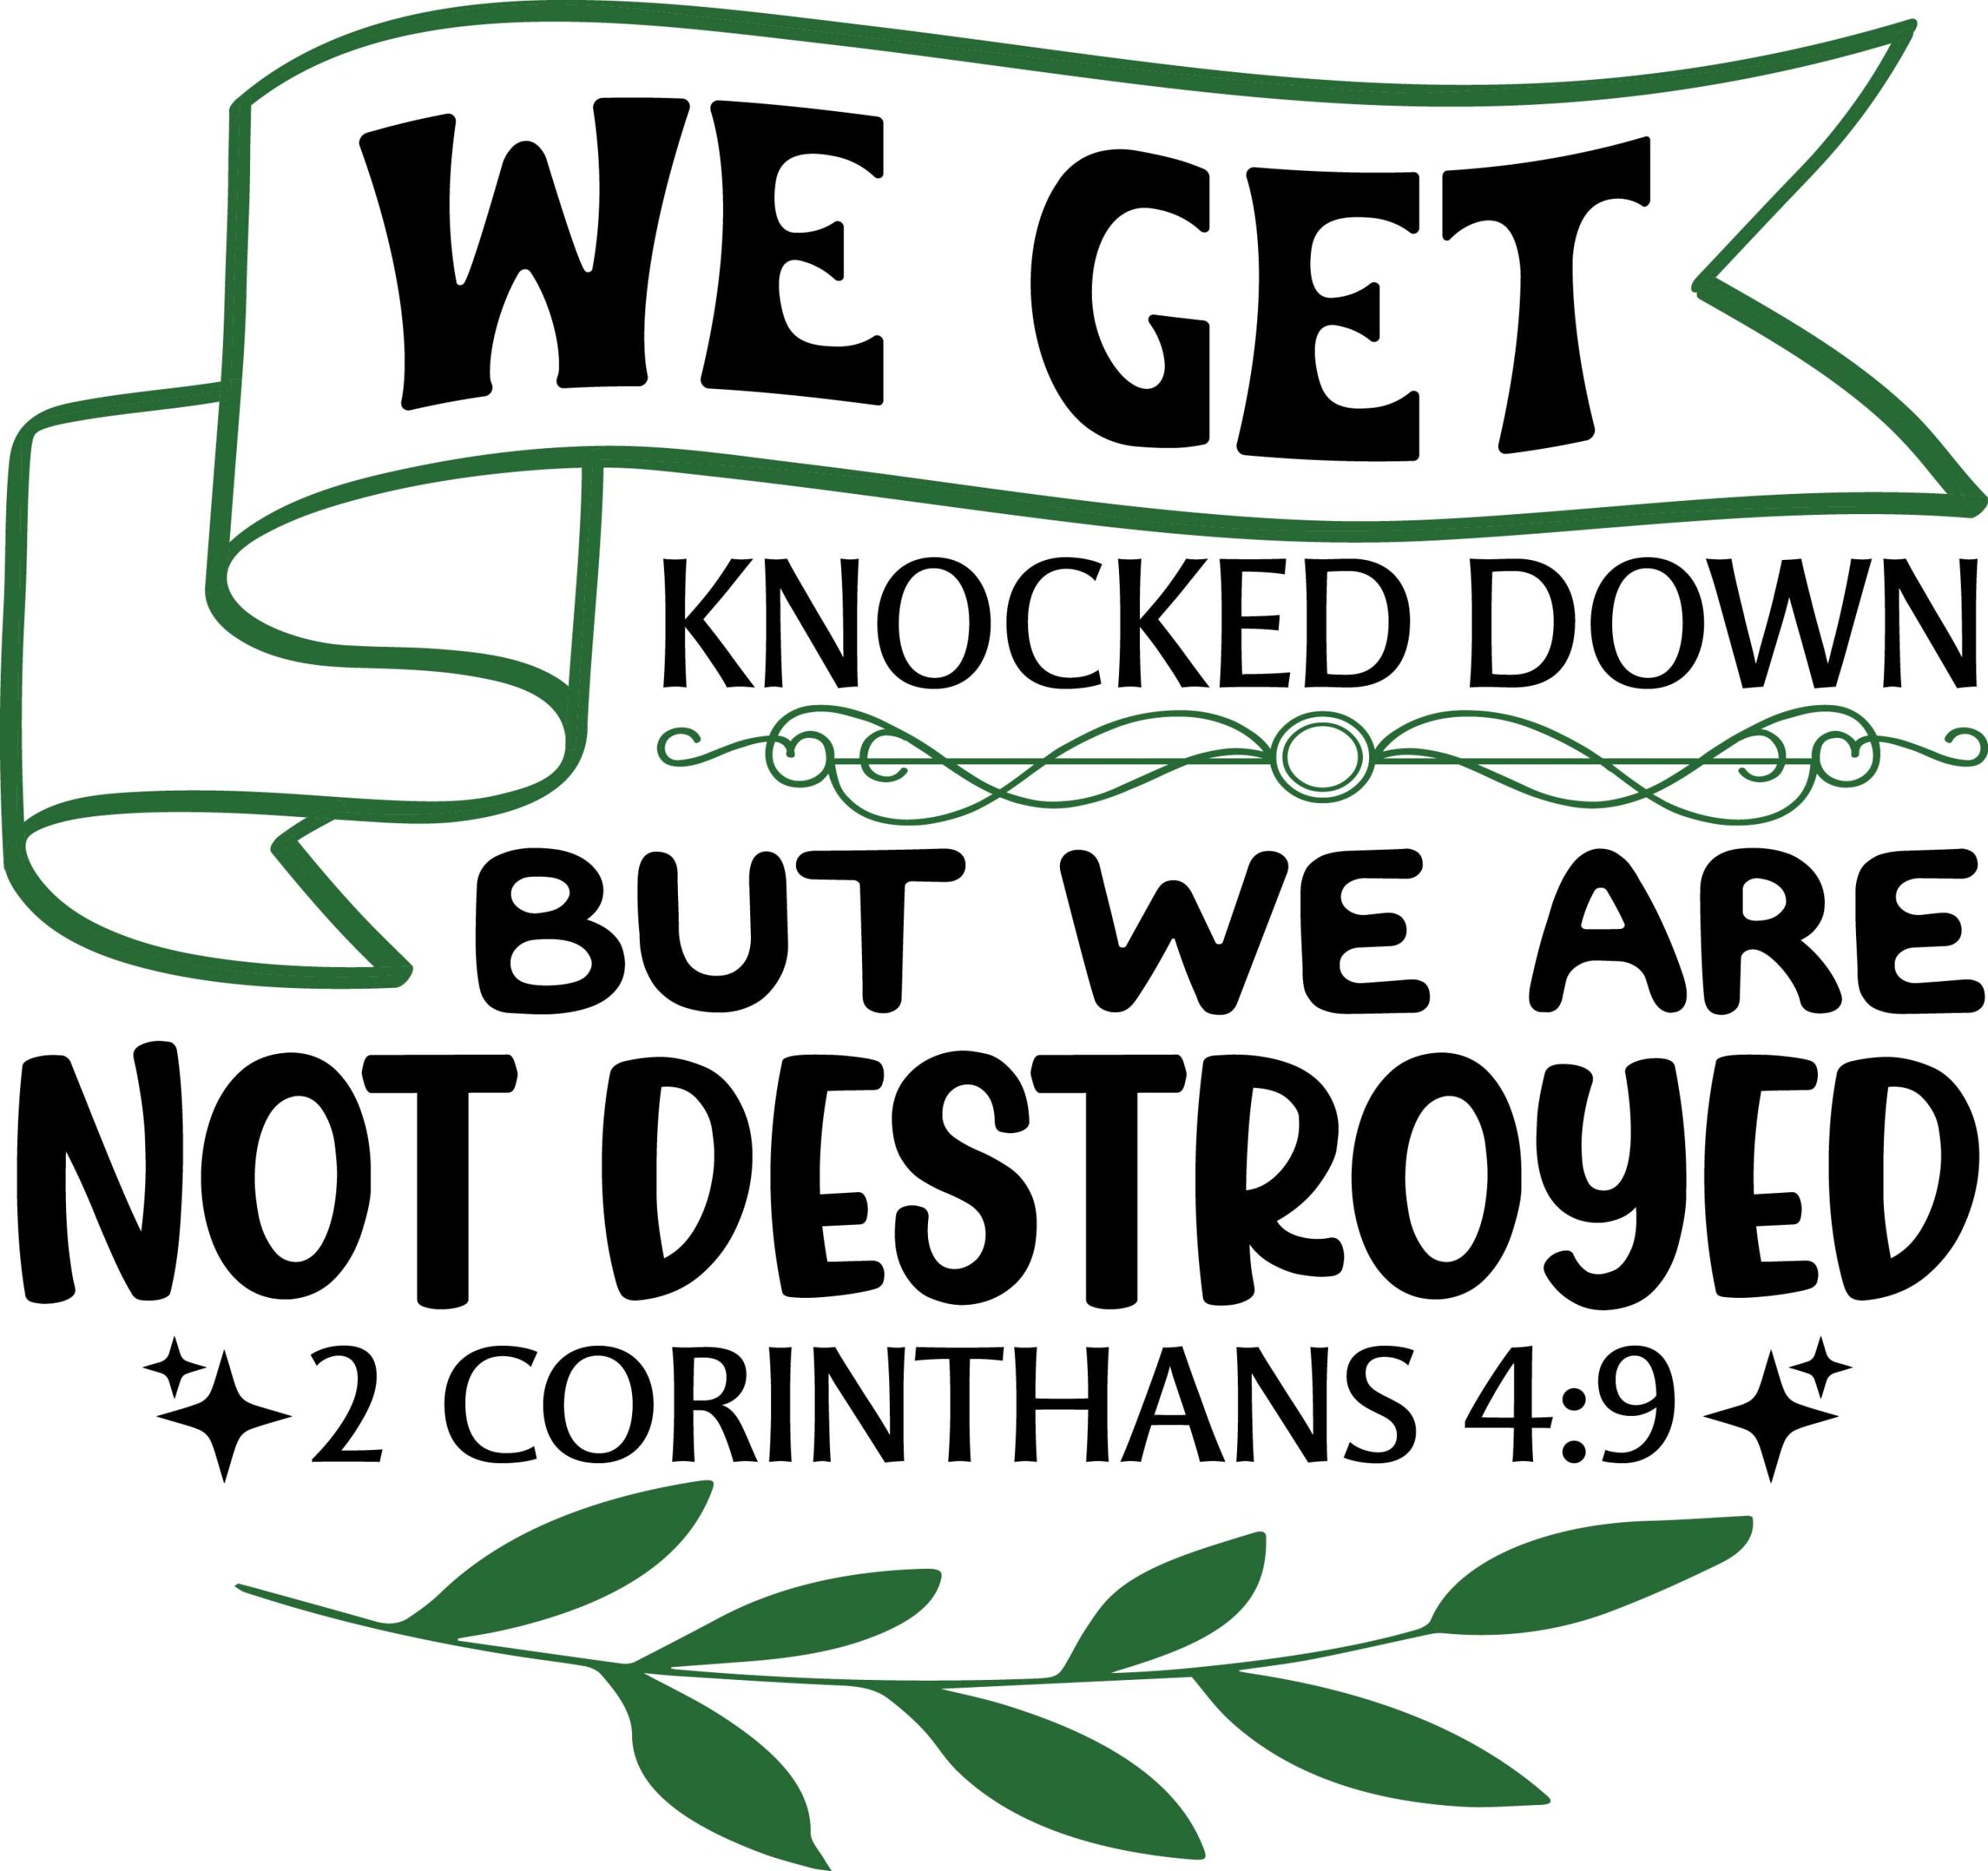 We get knocked down but we are not destroyed 2 Corinthans 4:9, bible verses, scripture verses, svg files, passages, sayings, cricut designs, silhouette, embroidery, bundle, free cut files, design space, vector